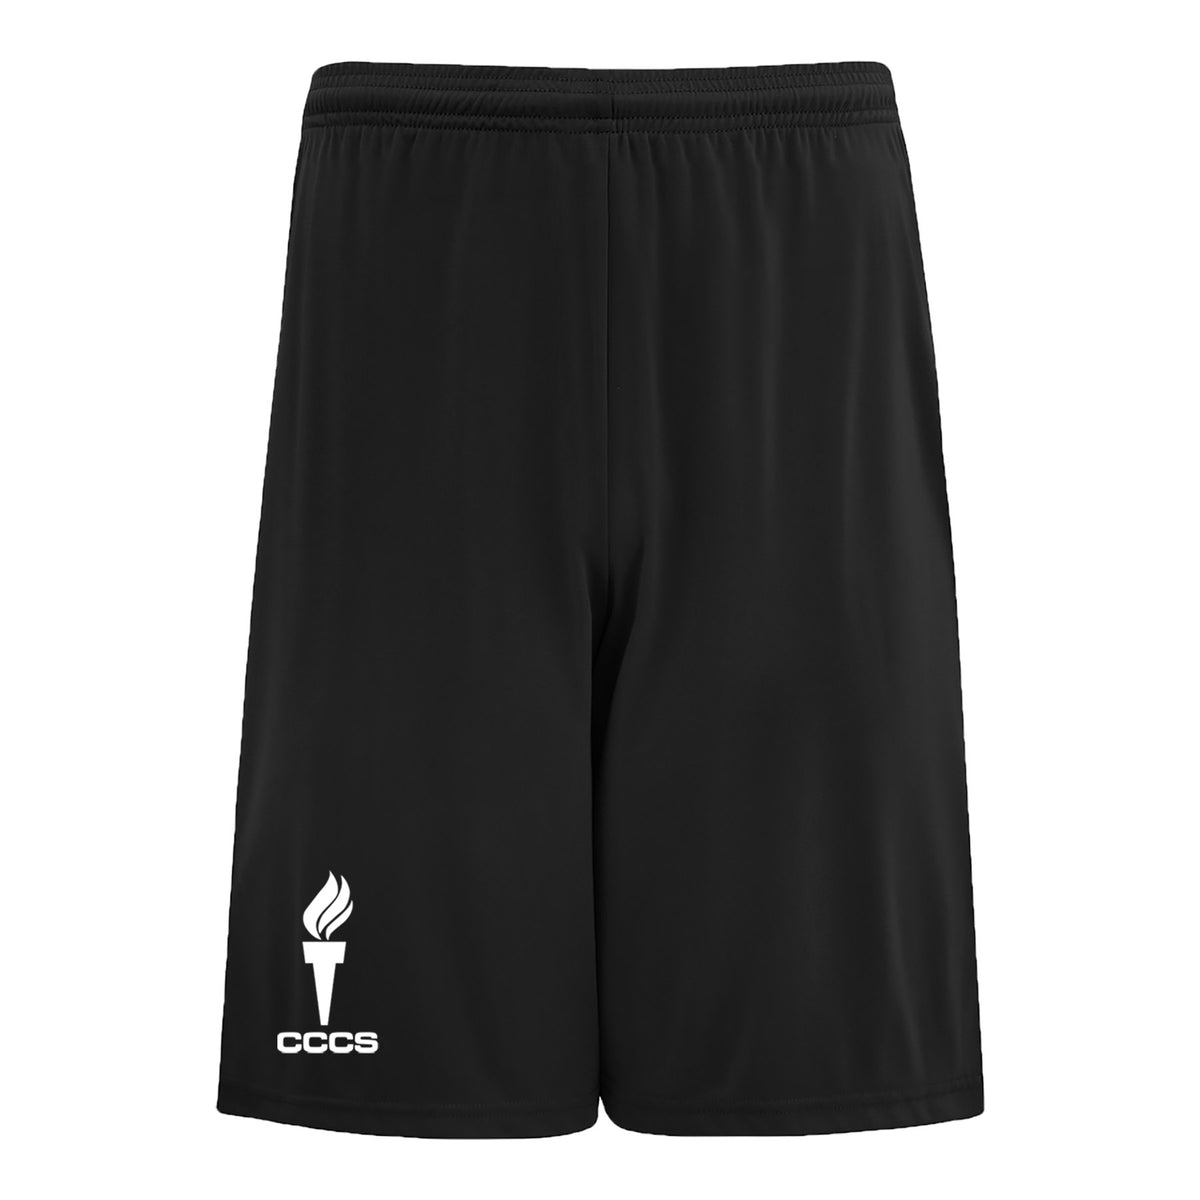 CATHEDRAL GYM SHORTS, WICKING, ADULT